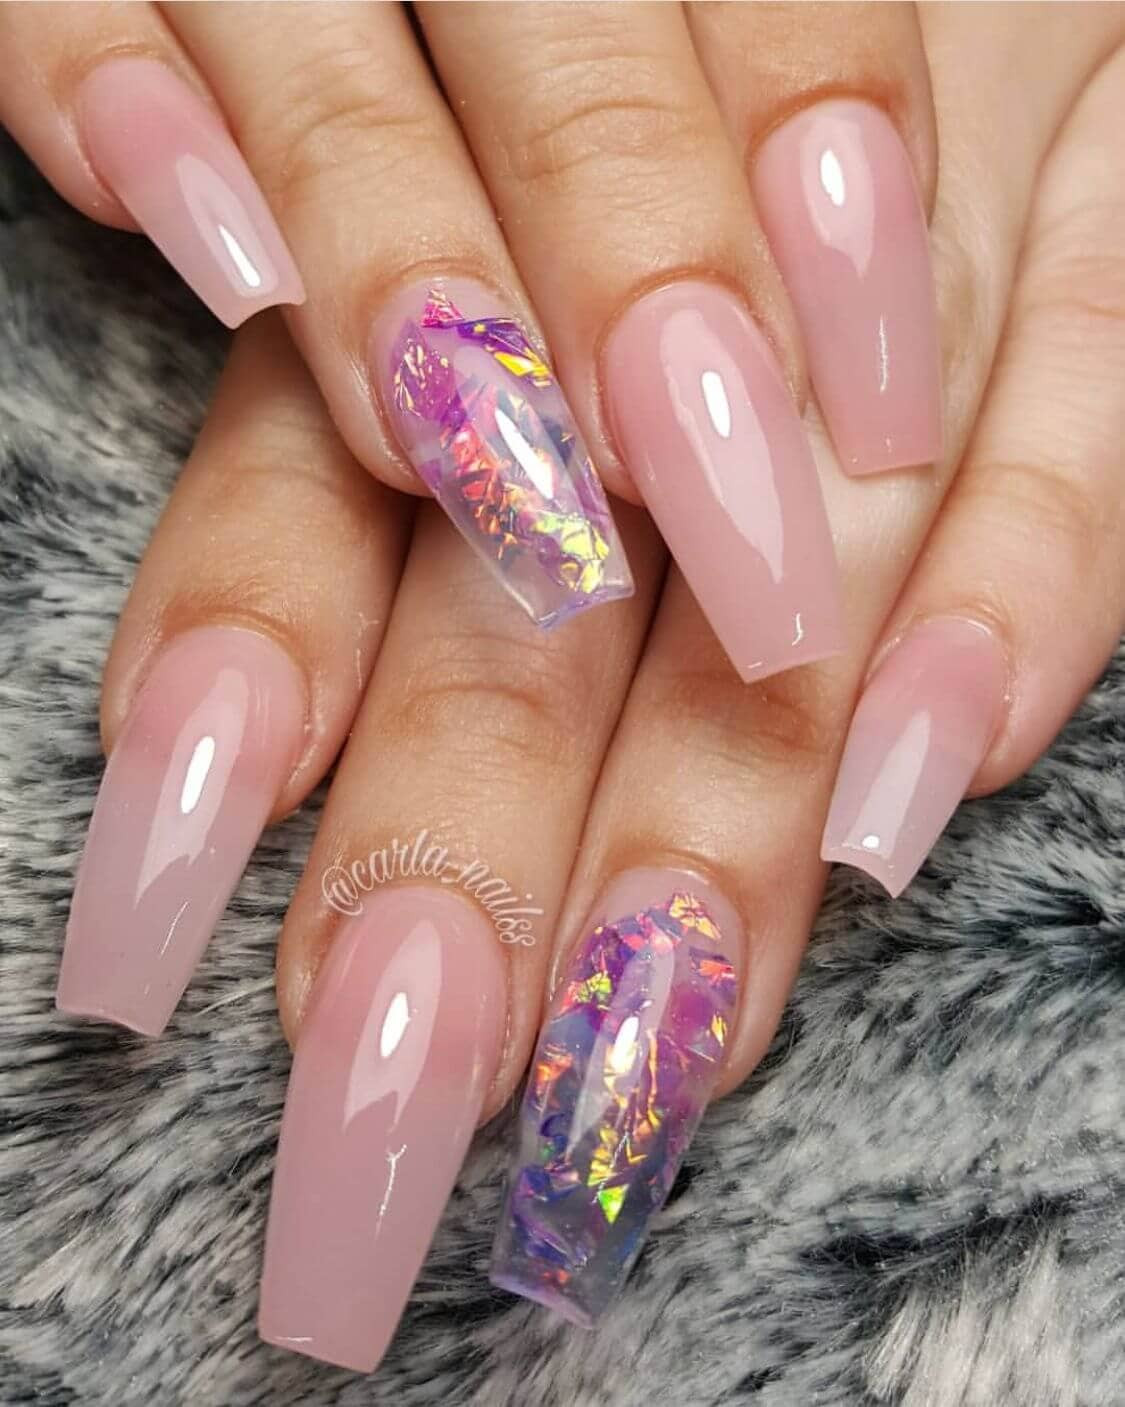 Natural Glitter Nails
 50 Awesome Coffin Nails Designs You’ll Flip For in 2020